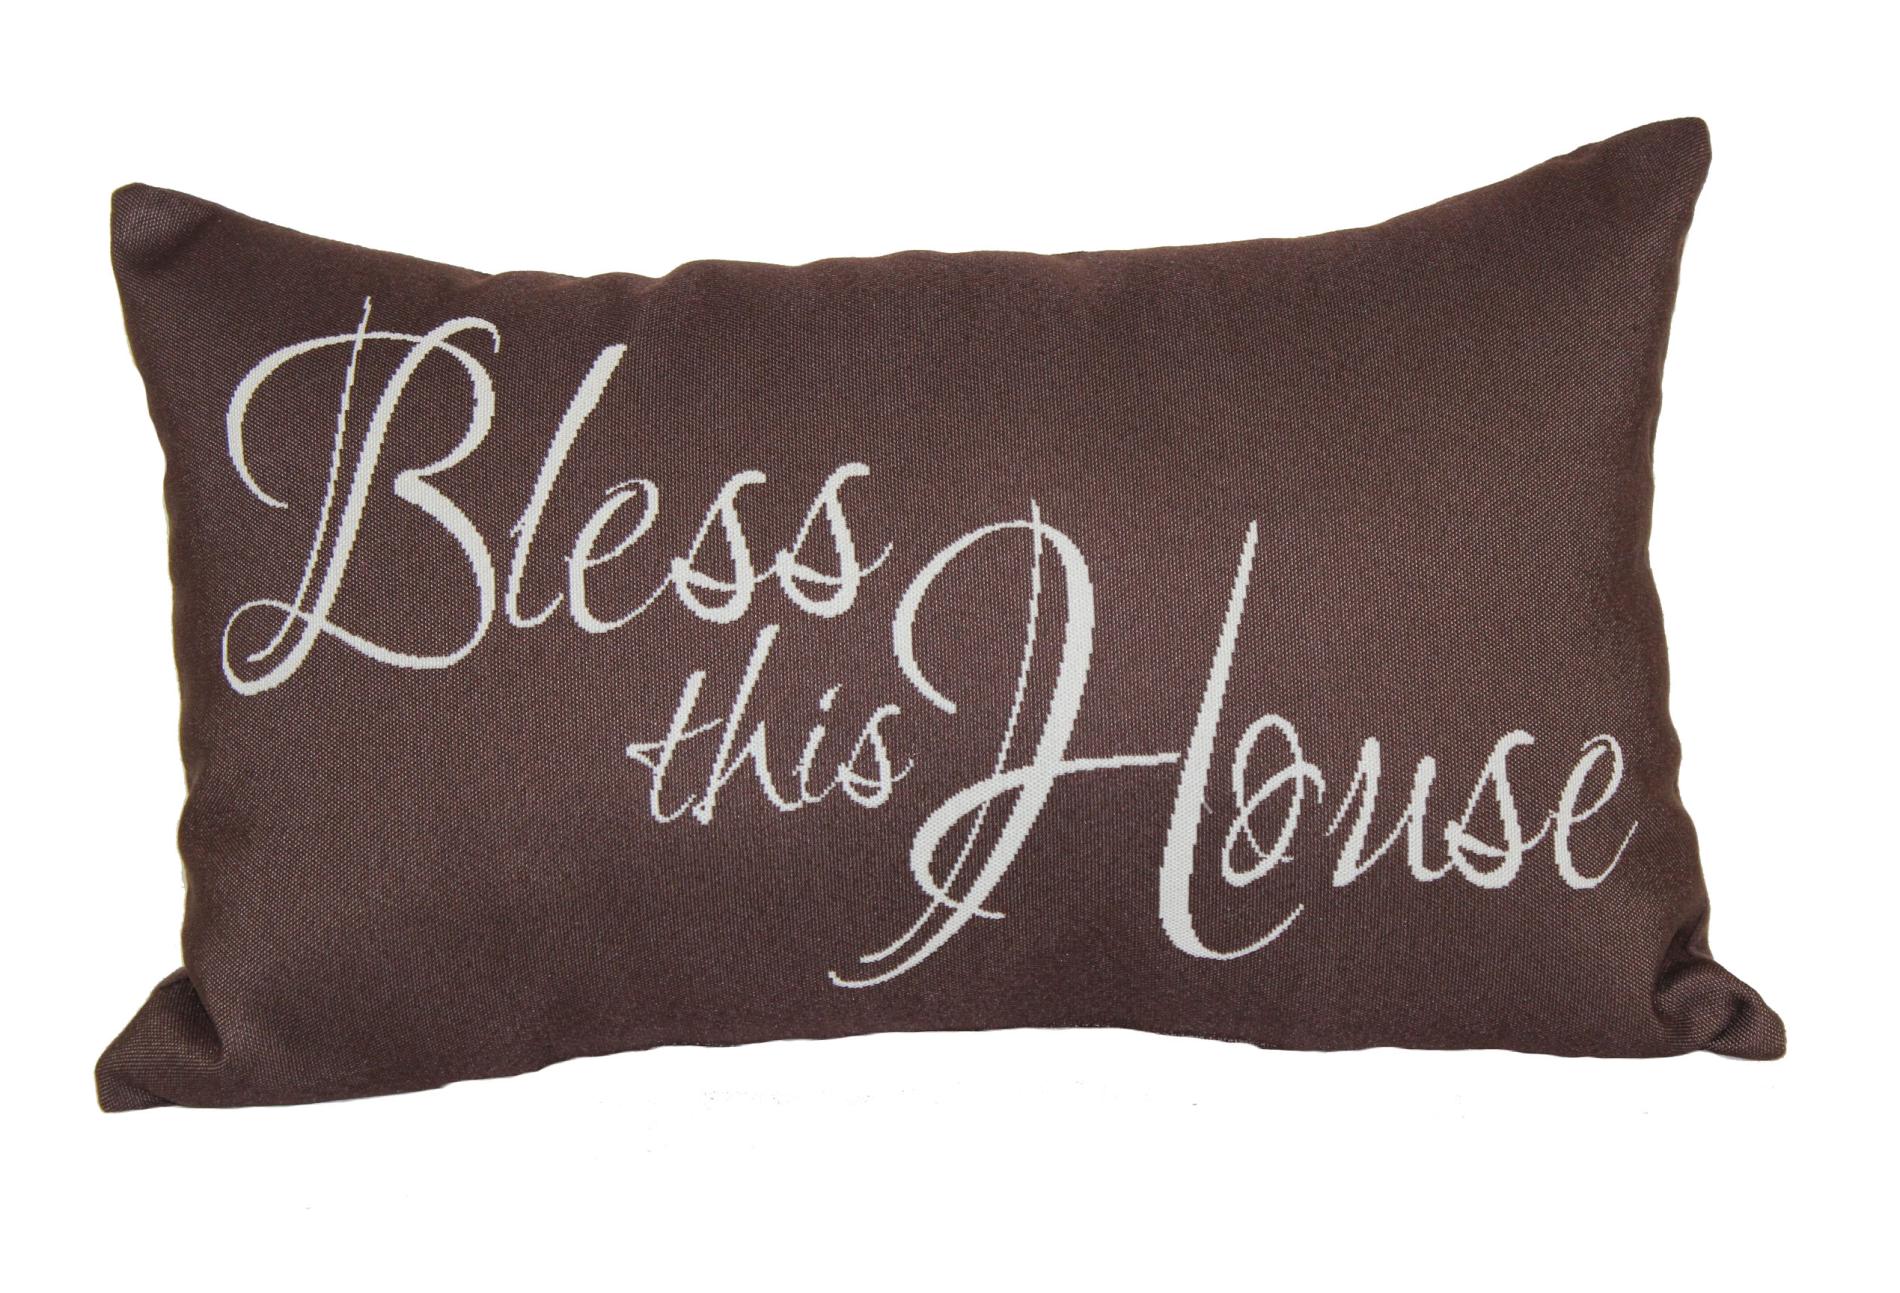 Decorative Throw Pillow - Bless This House